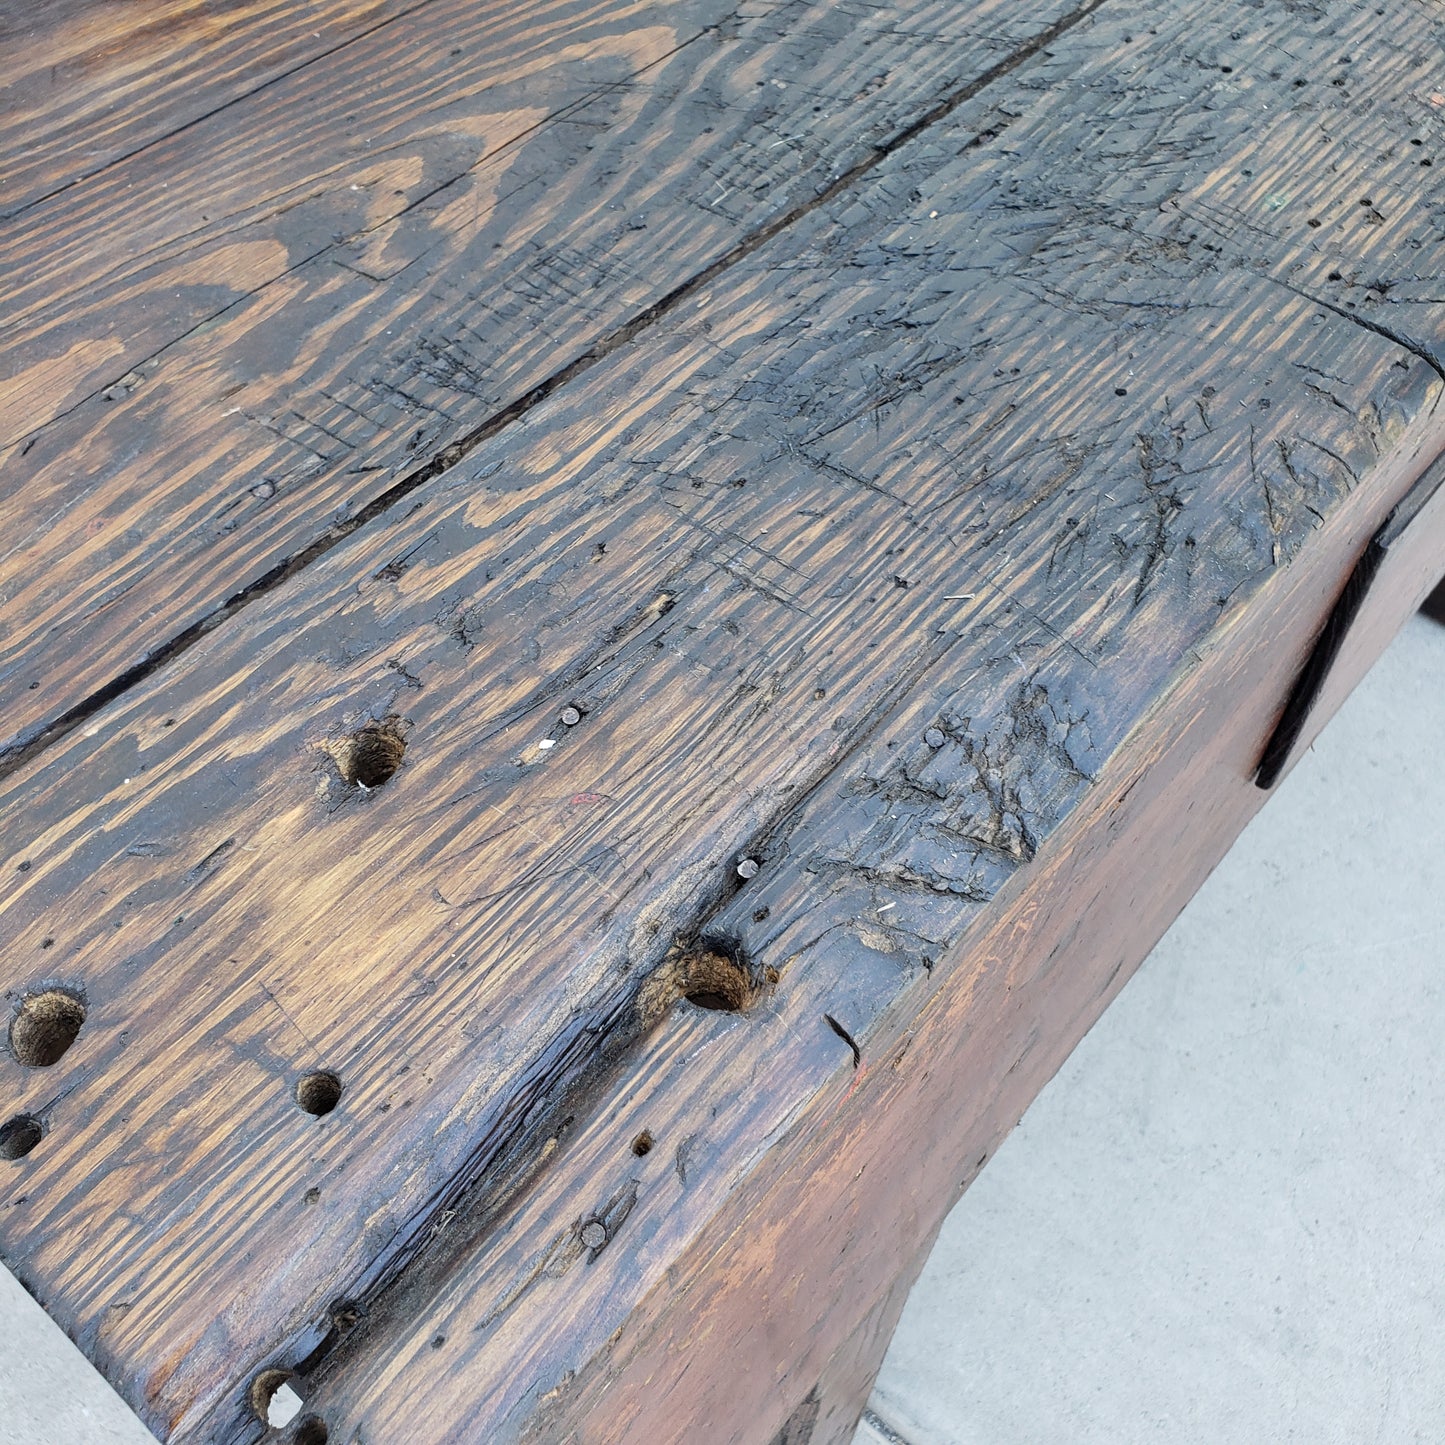 Antique Wooden Work Table